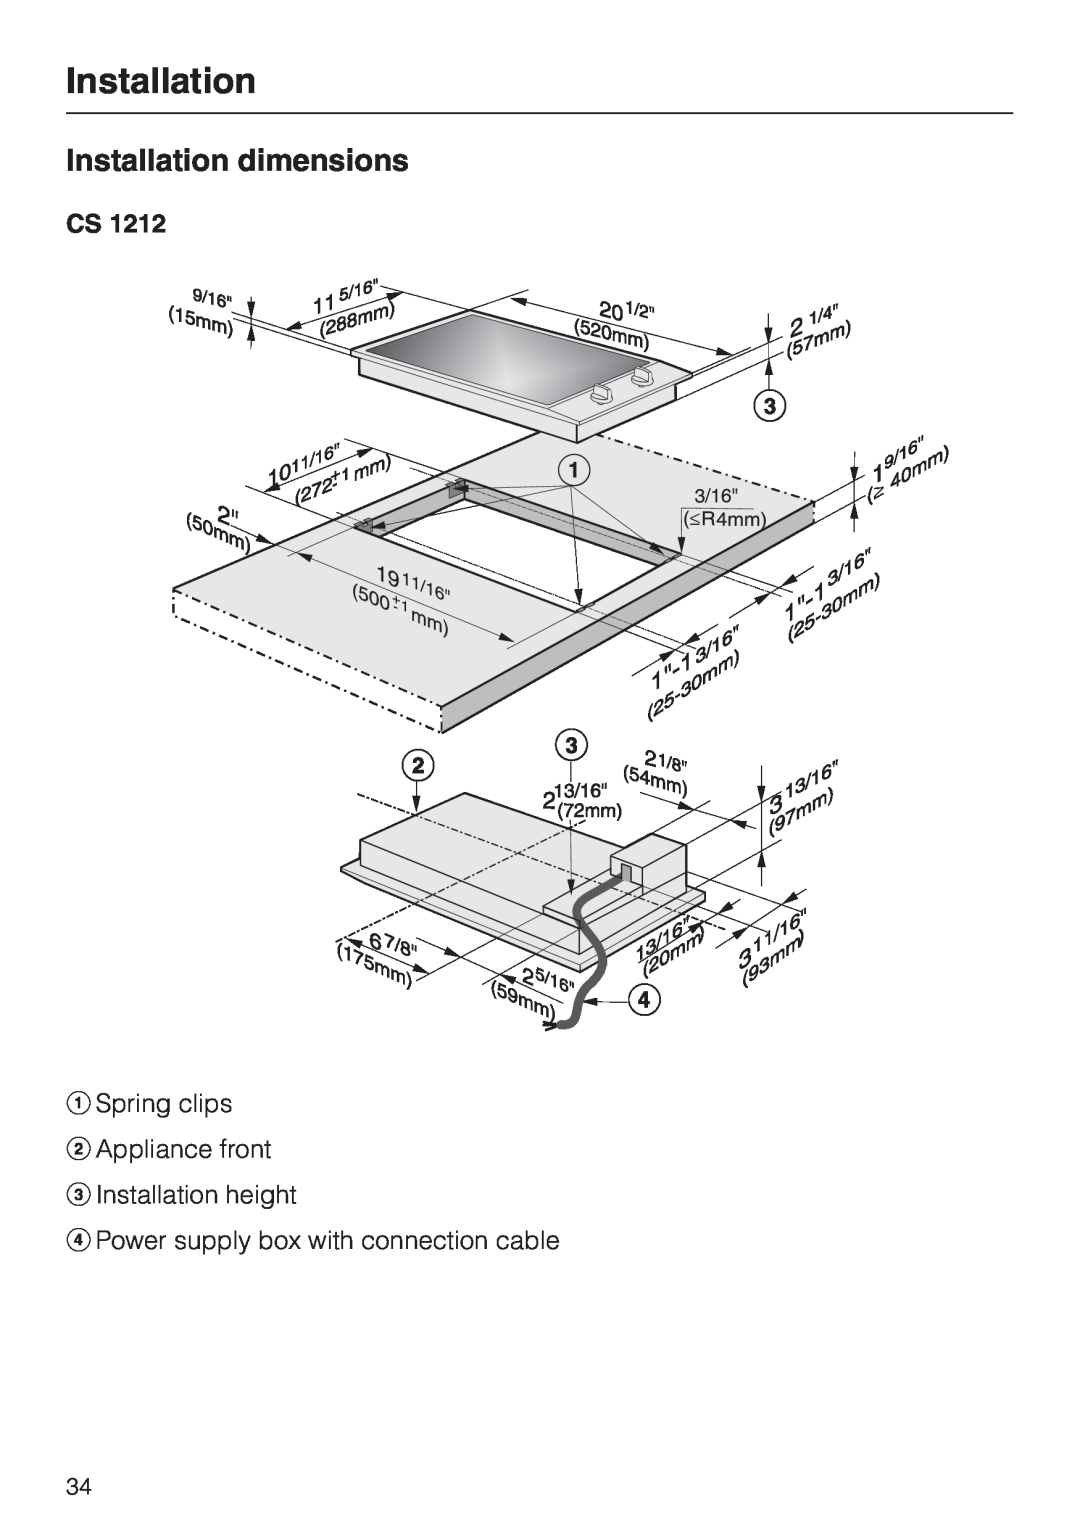 Miele CS1212 installation instructions Installation dimensions, a Spring clips b Appliance front, c Installation height 